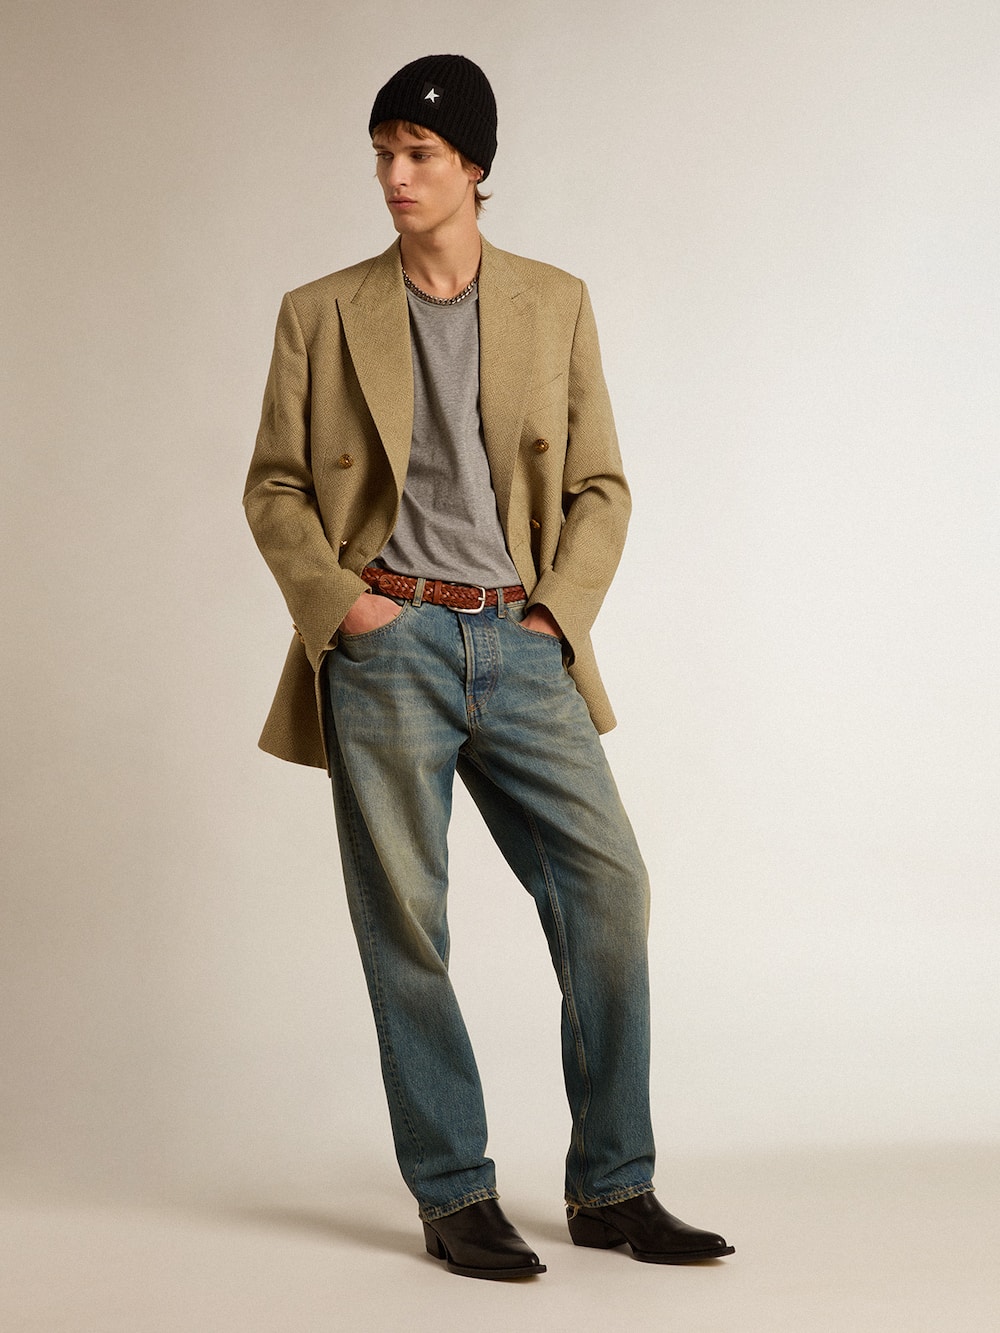 Golden Goose - Men’s pale beech-colored double-breasted blazer  in 